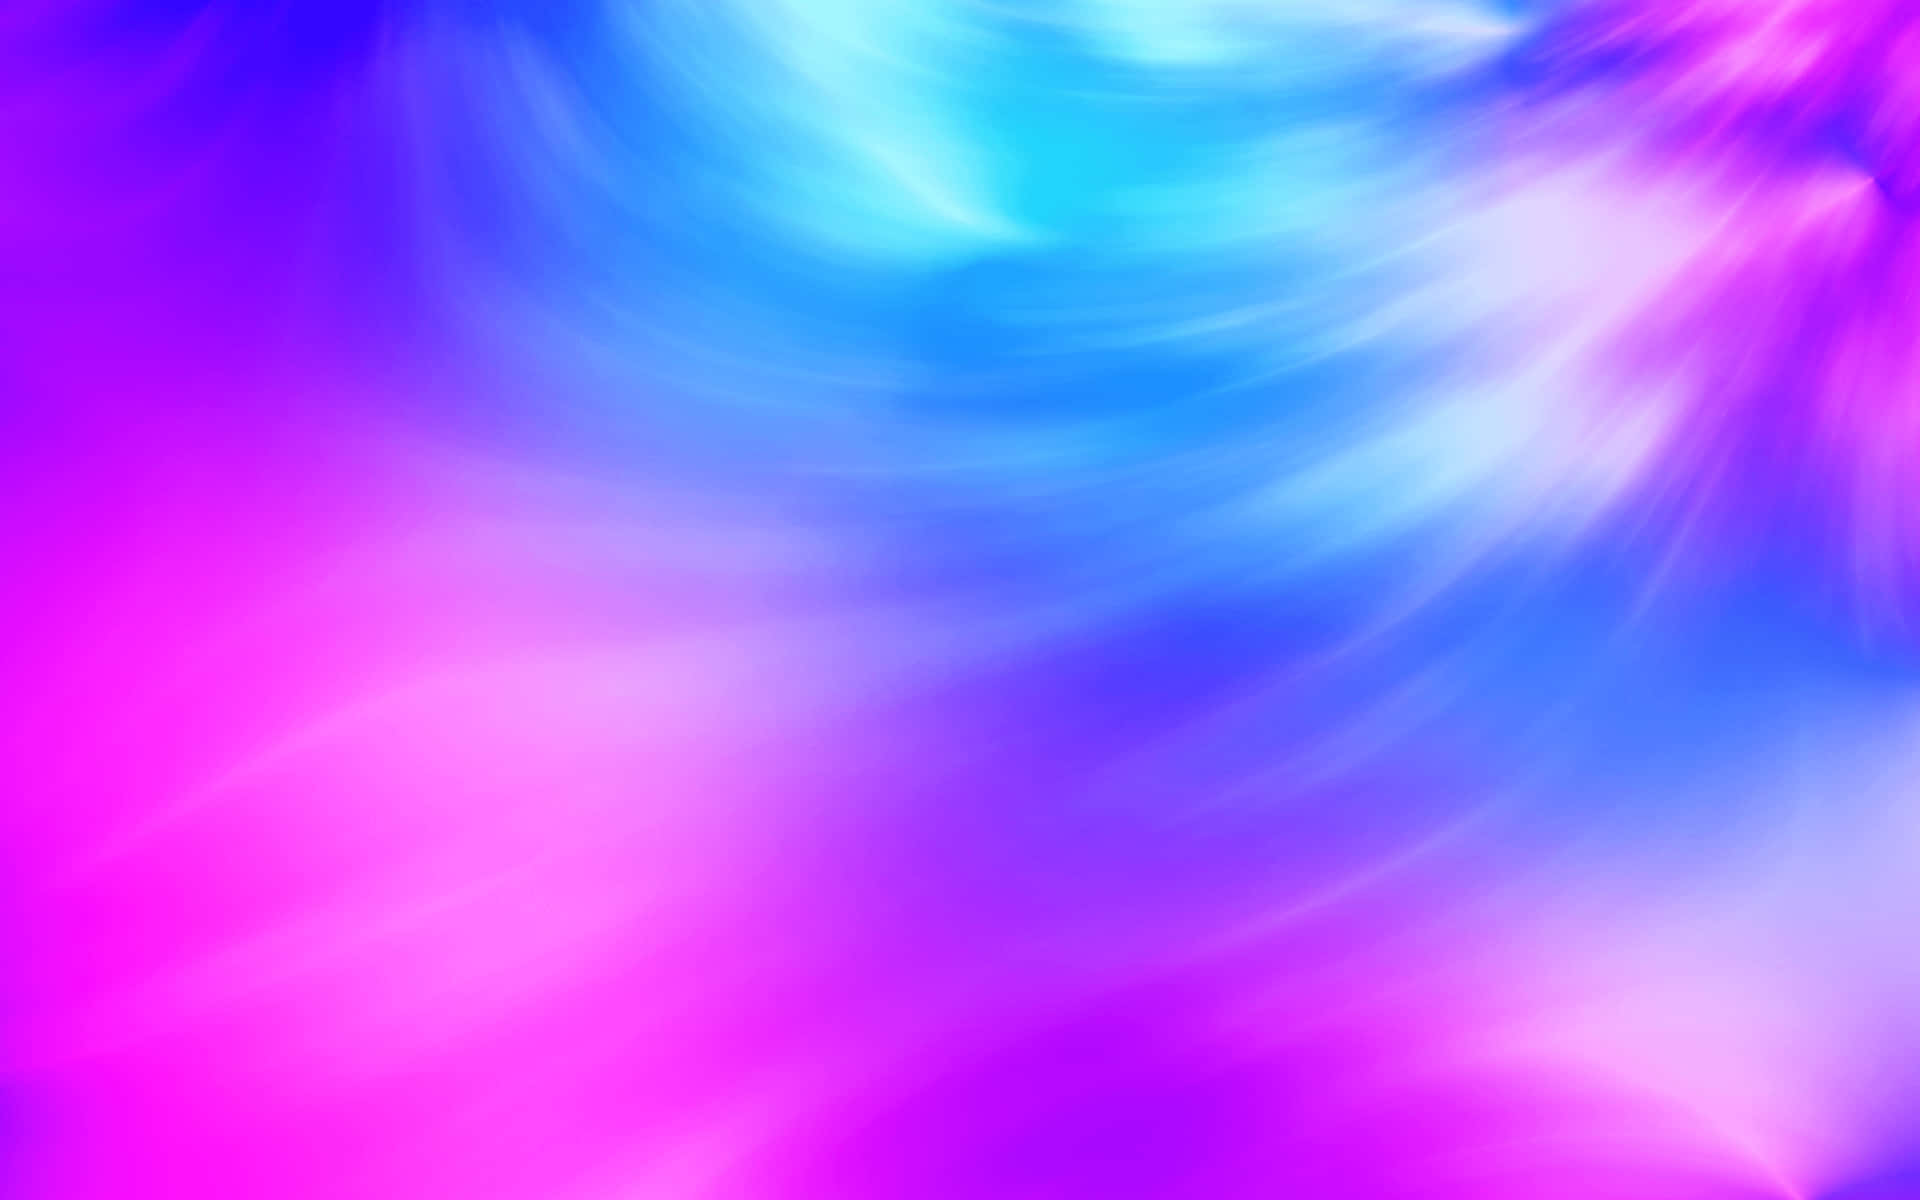 100+] Blue And Pink Background s 